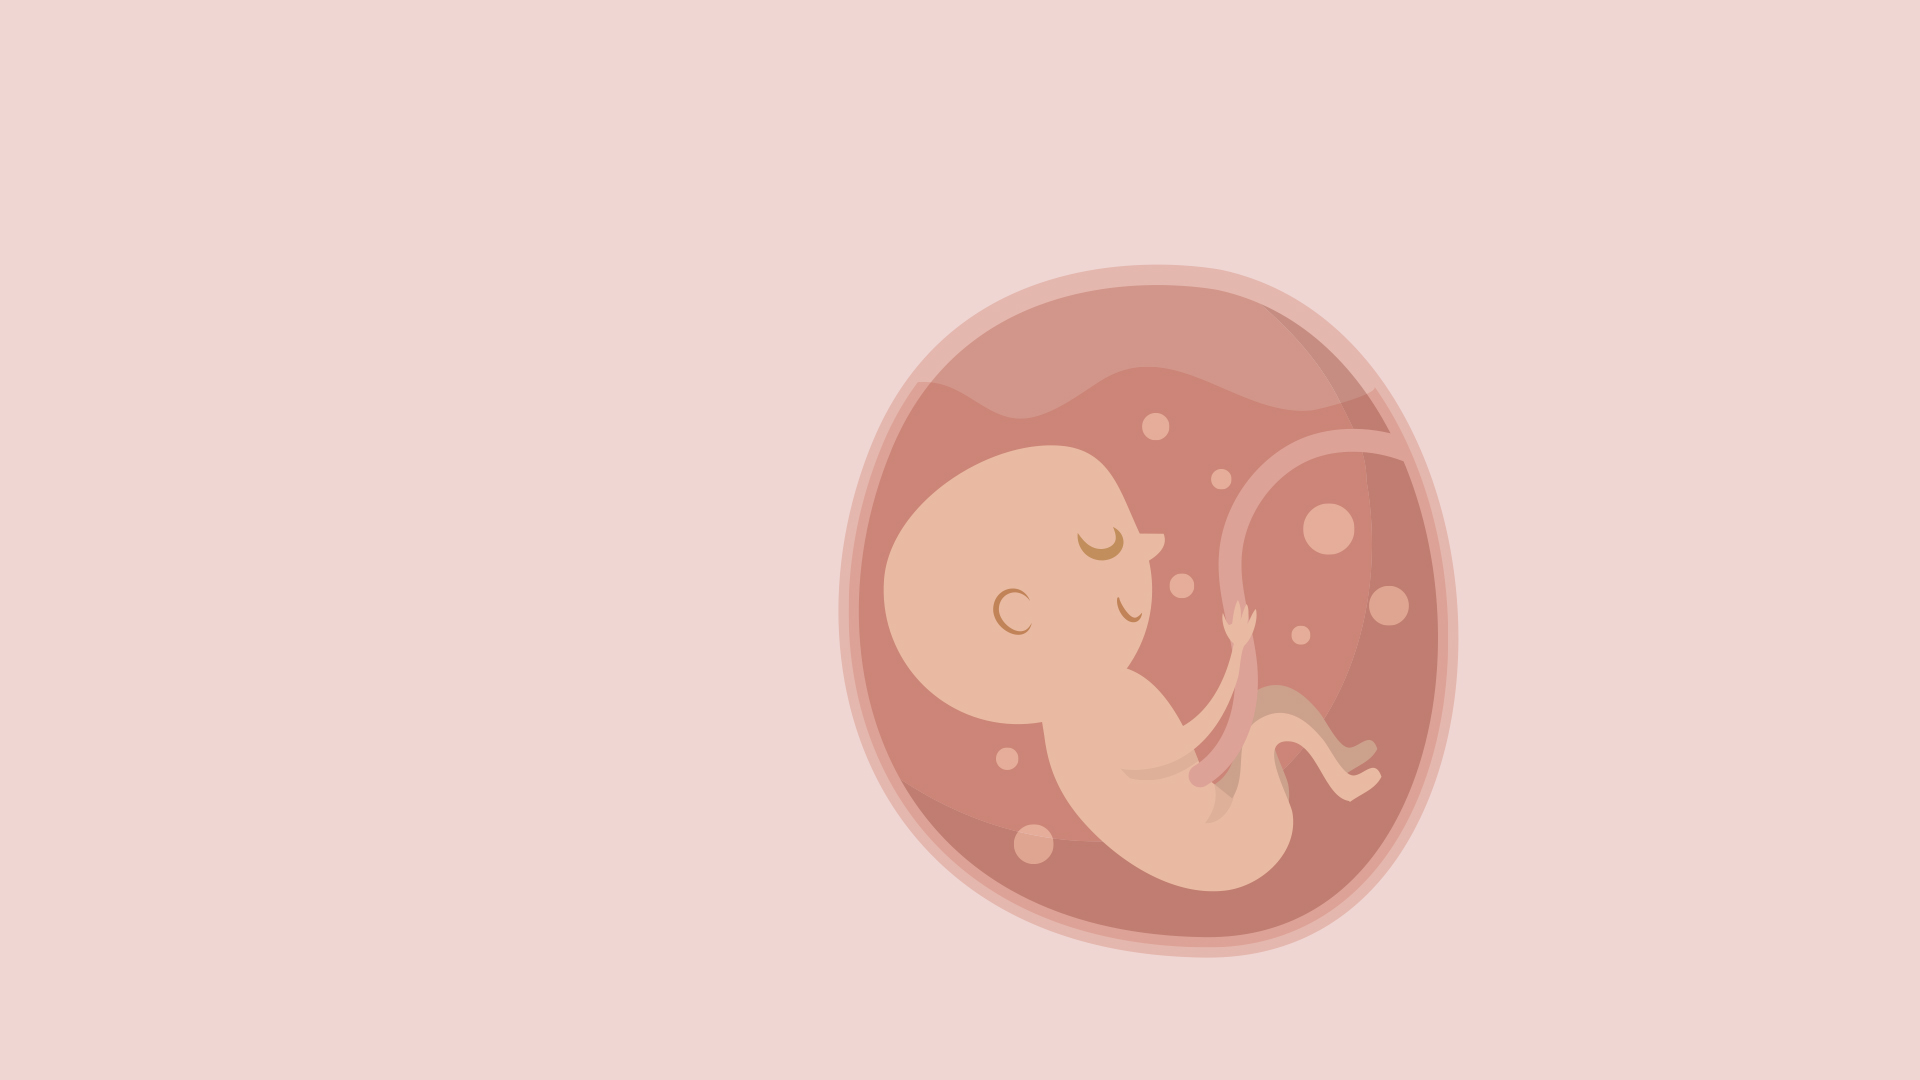 Character desgn for a 2D animated baby in a womb.